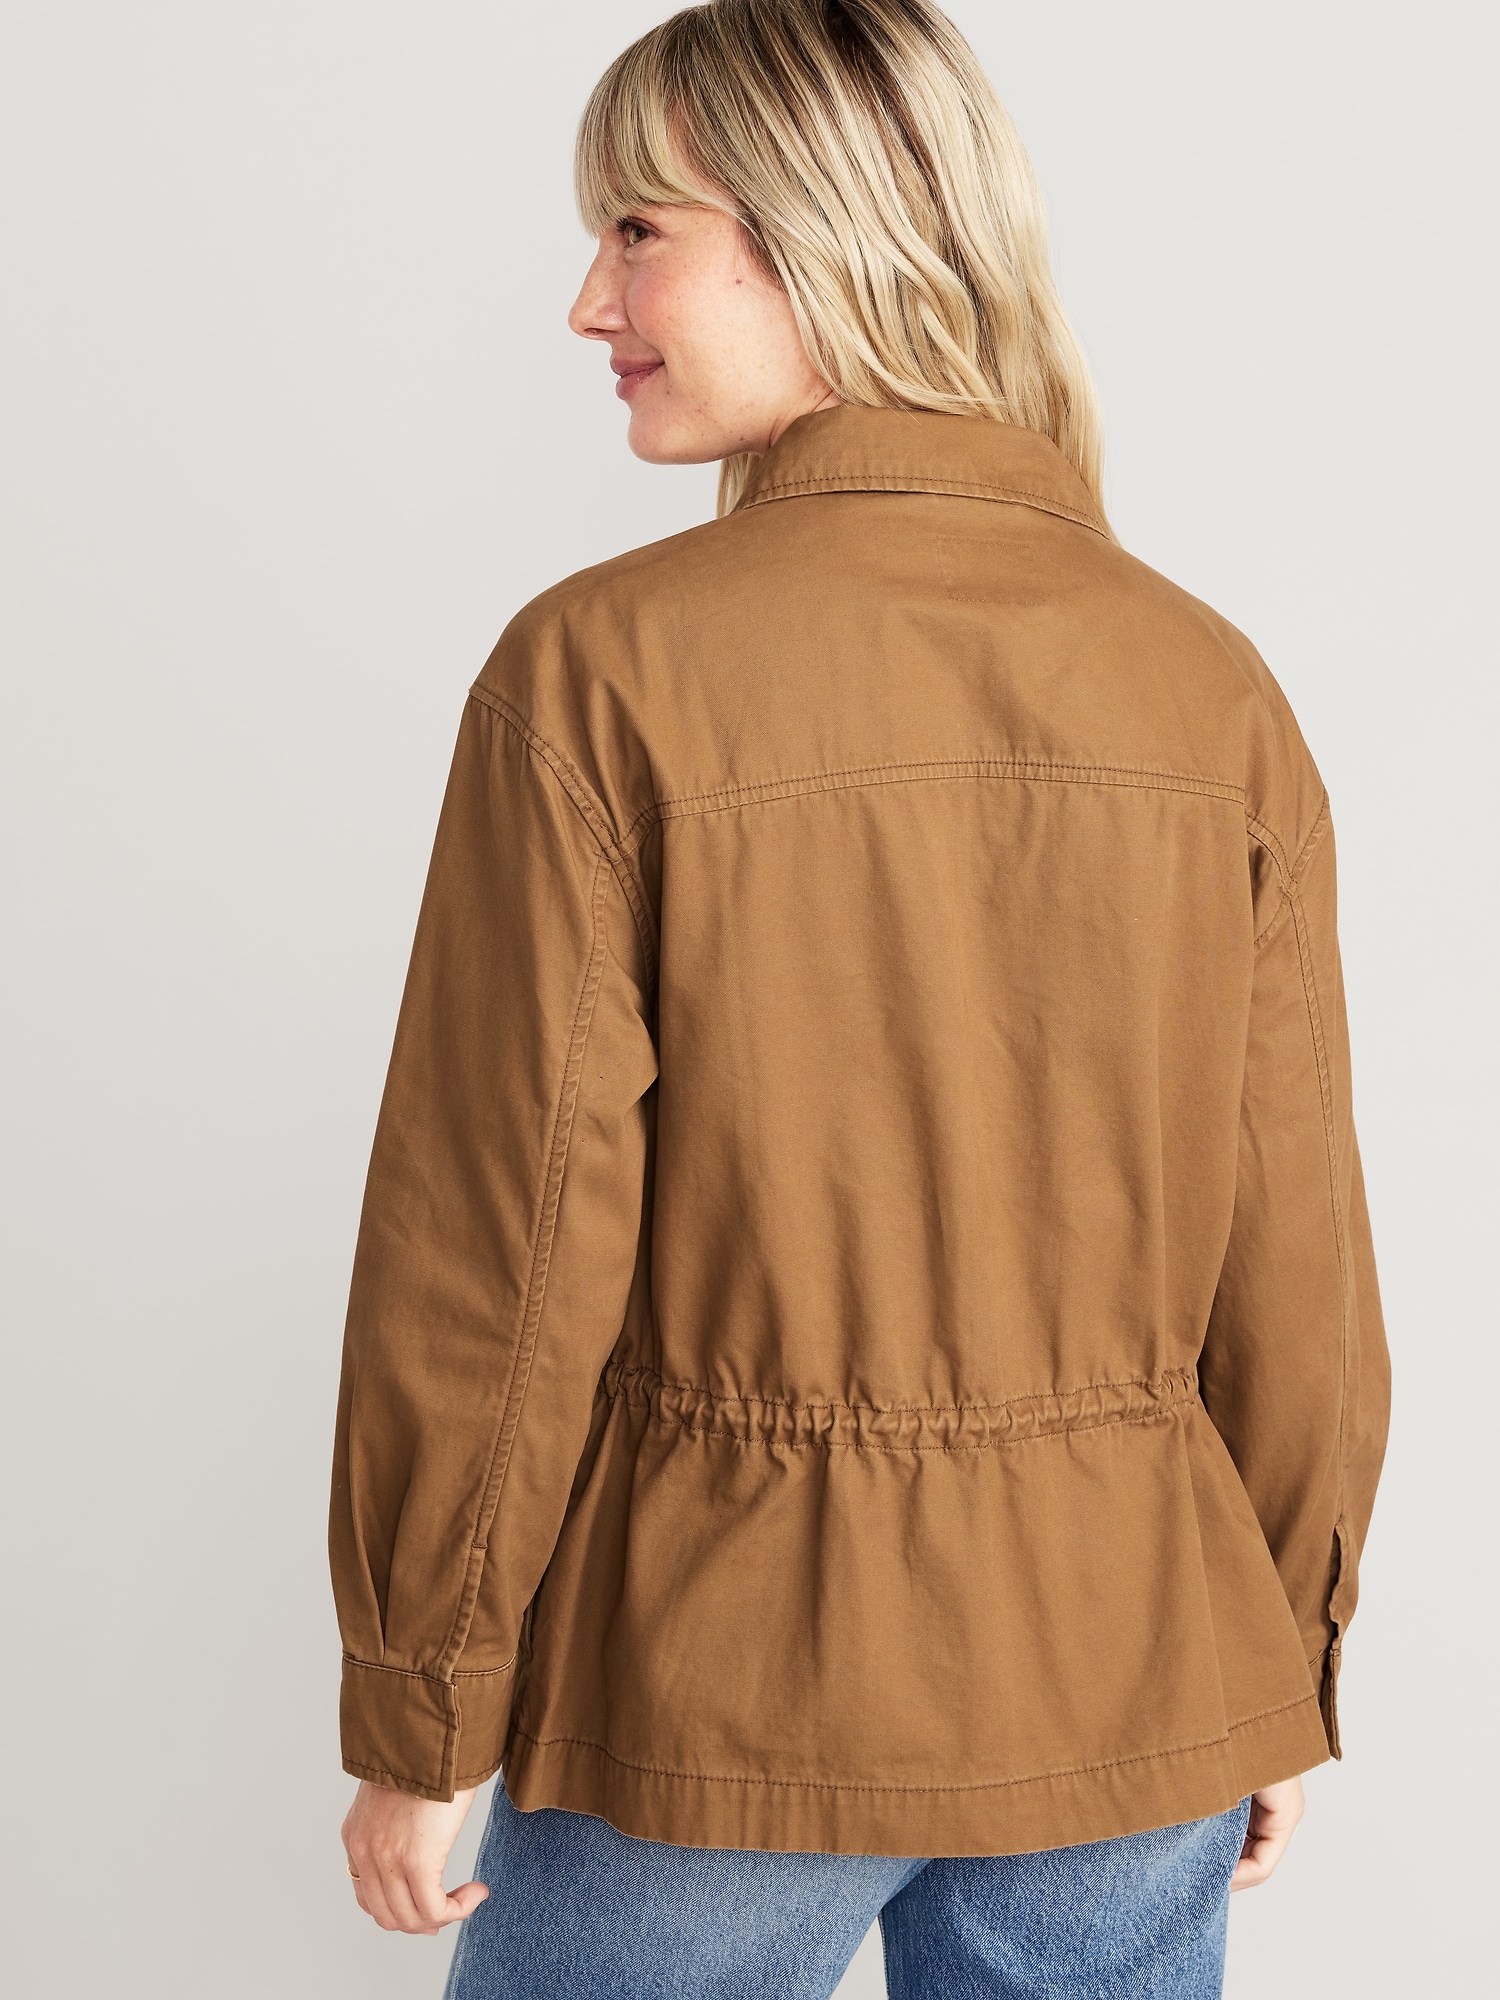 Cinched-Waist Utility Jacket for Women | Old Navy